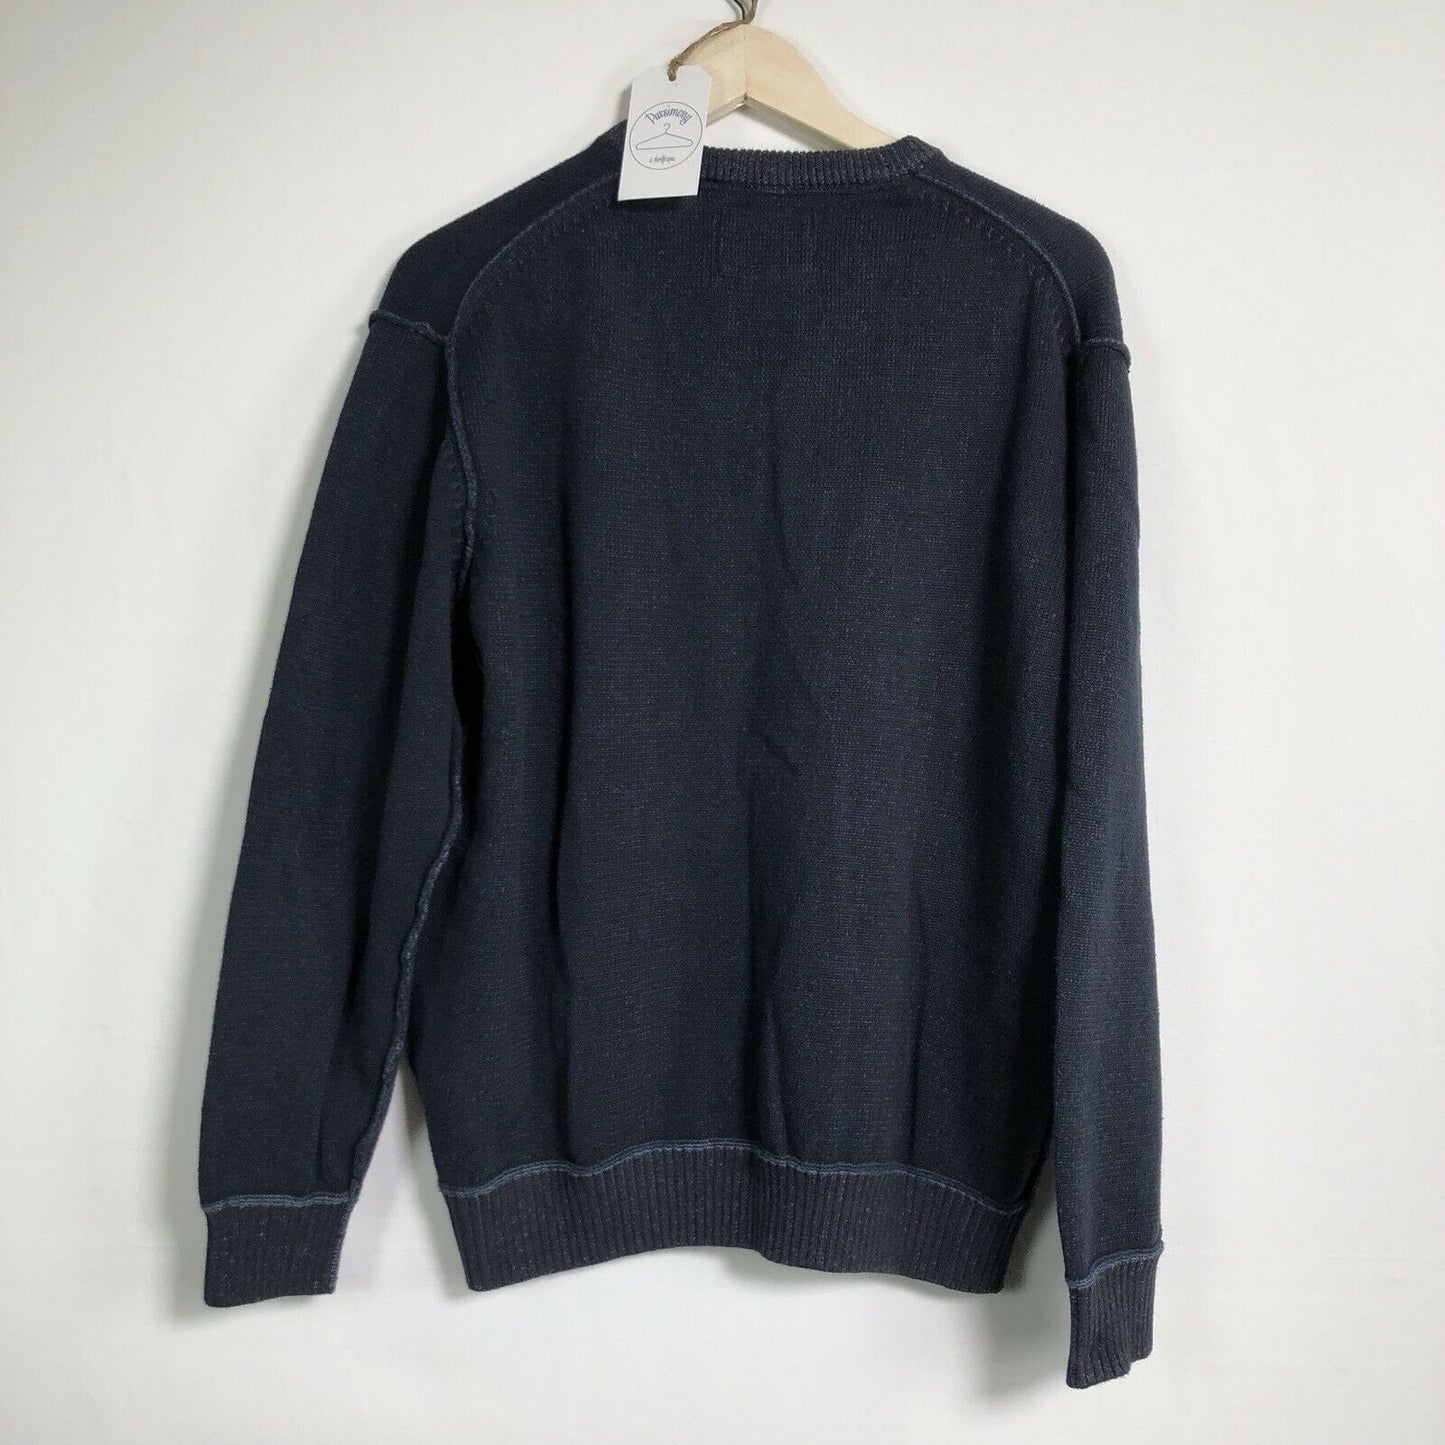 Stay warm and stylish with this Vintage Weatherproof Men's V-Neck Pullover Sweater - Blue, Size L. Very Good Condition.